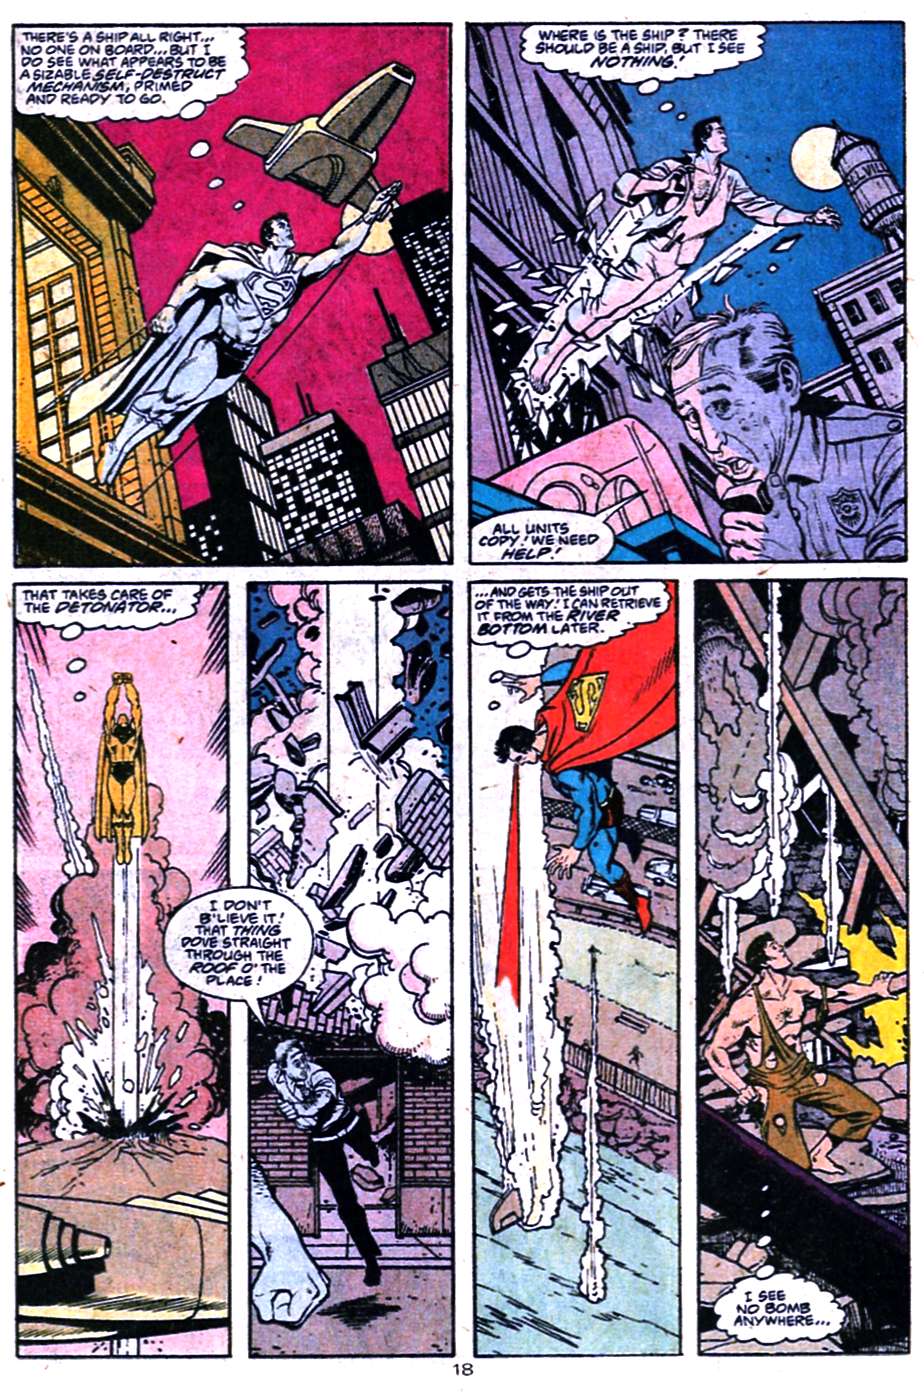 Adventures of Superman (1987) 457 Page 18